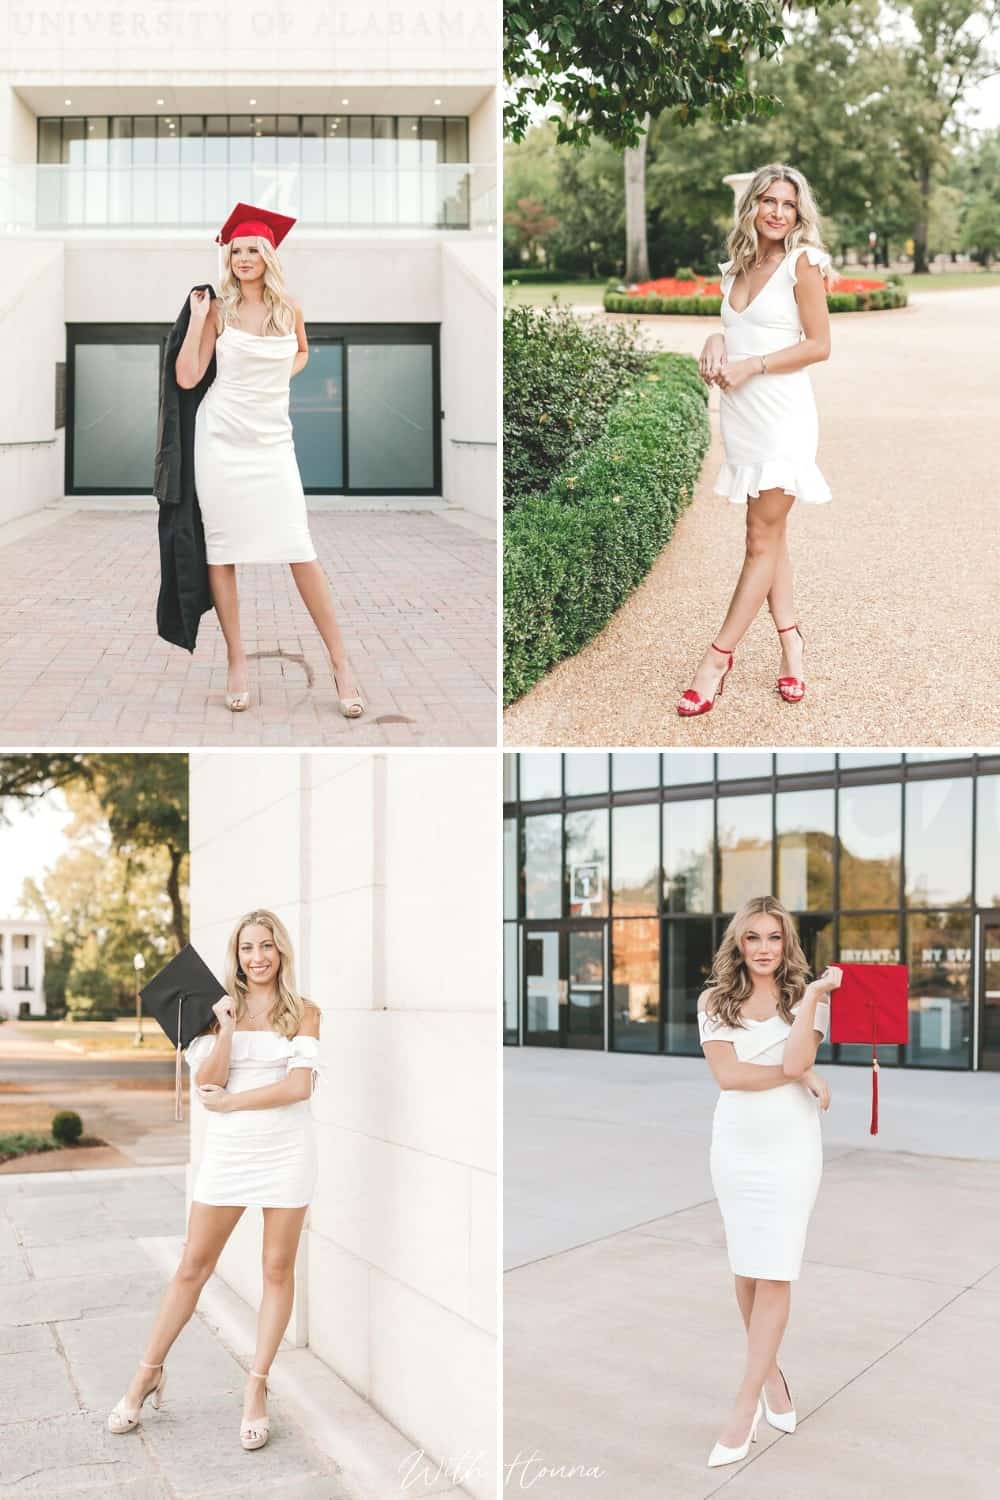 30 Insanely Cute White Graduation Outfit Ideas You Have to Get for Your